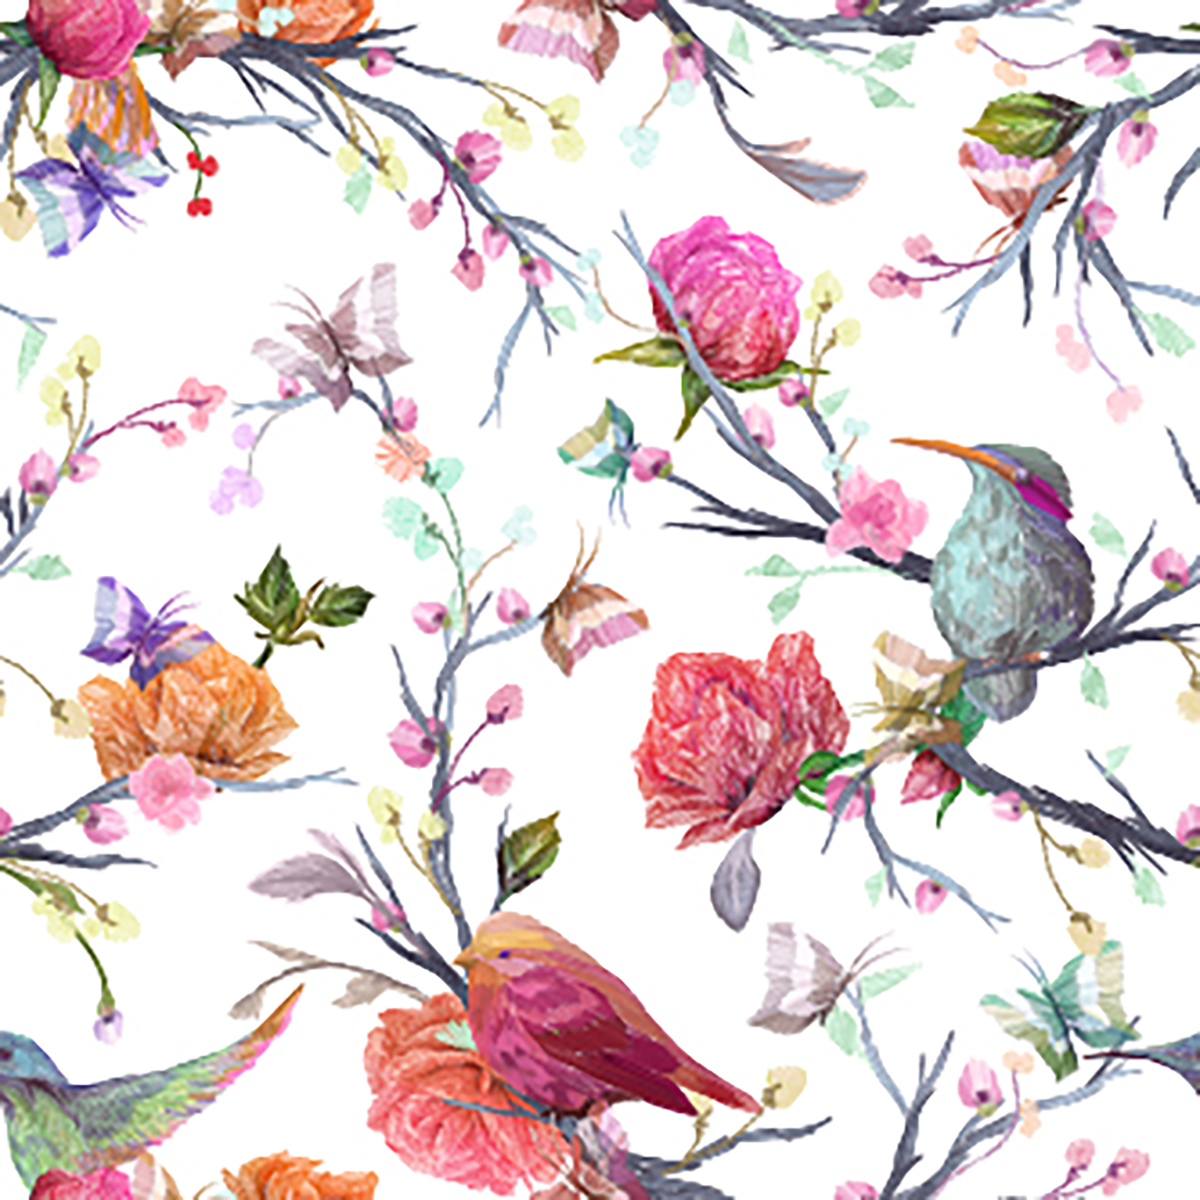 A pattern of colorful birds and flowers